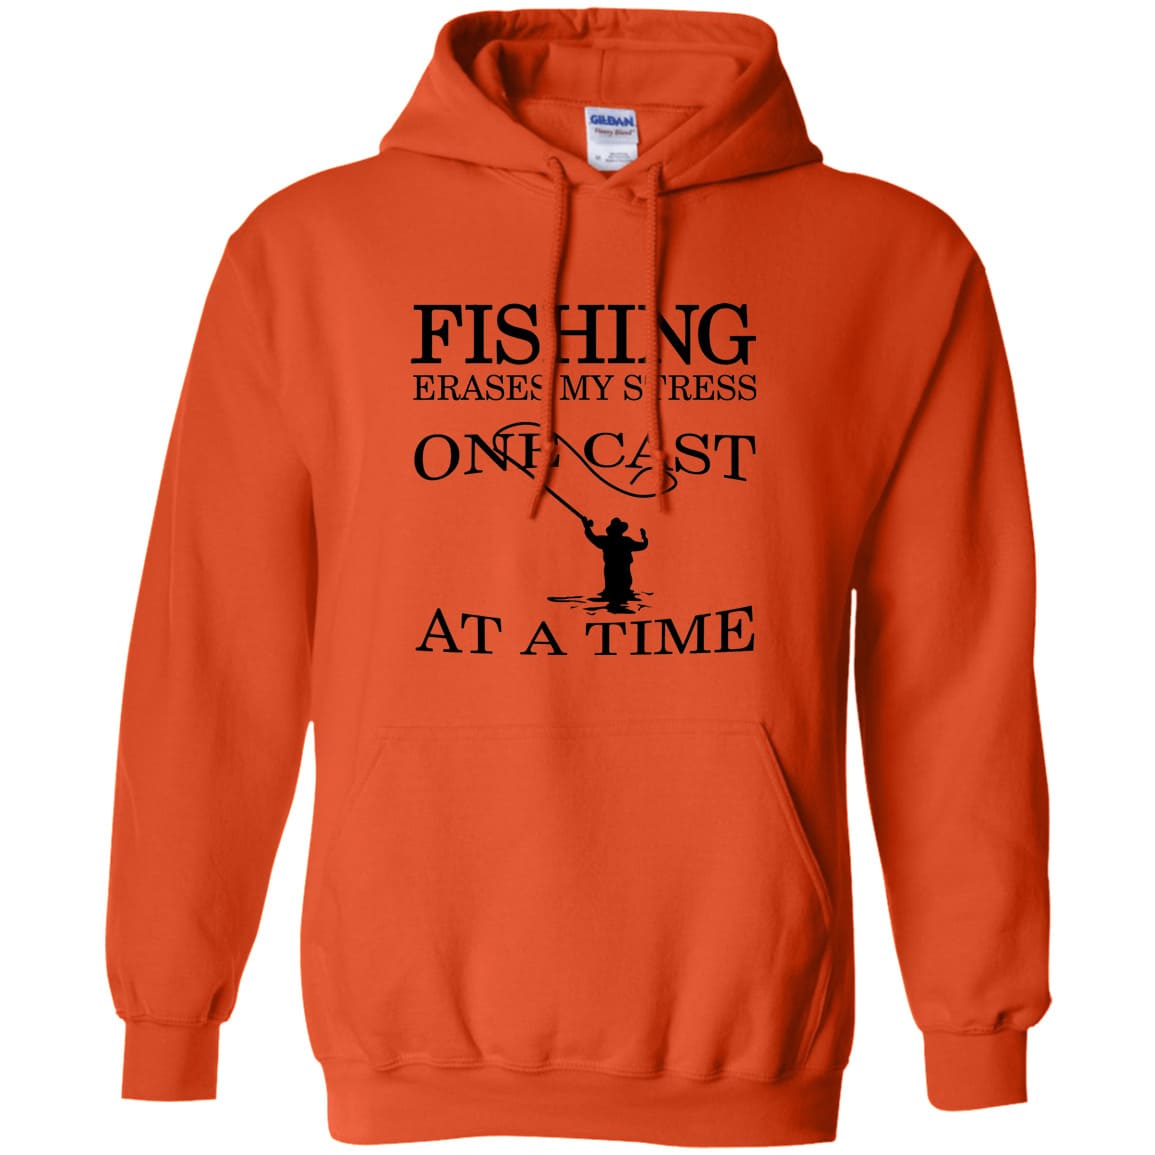 Fishing Erases Stress Pullover Hoodie b